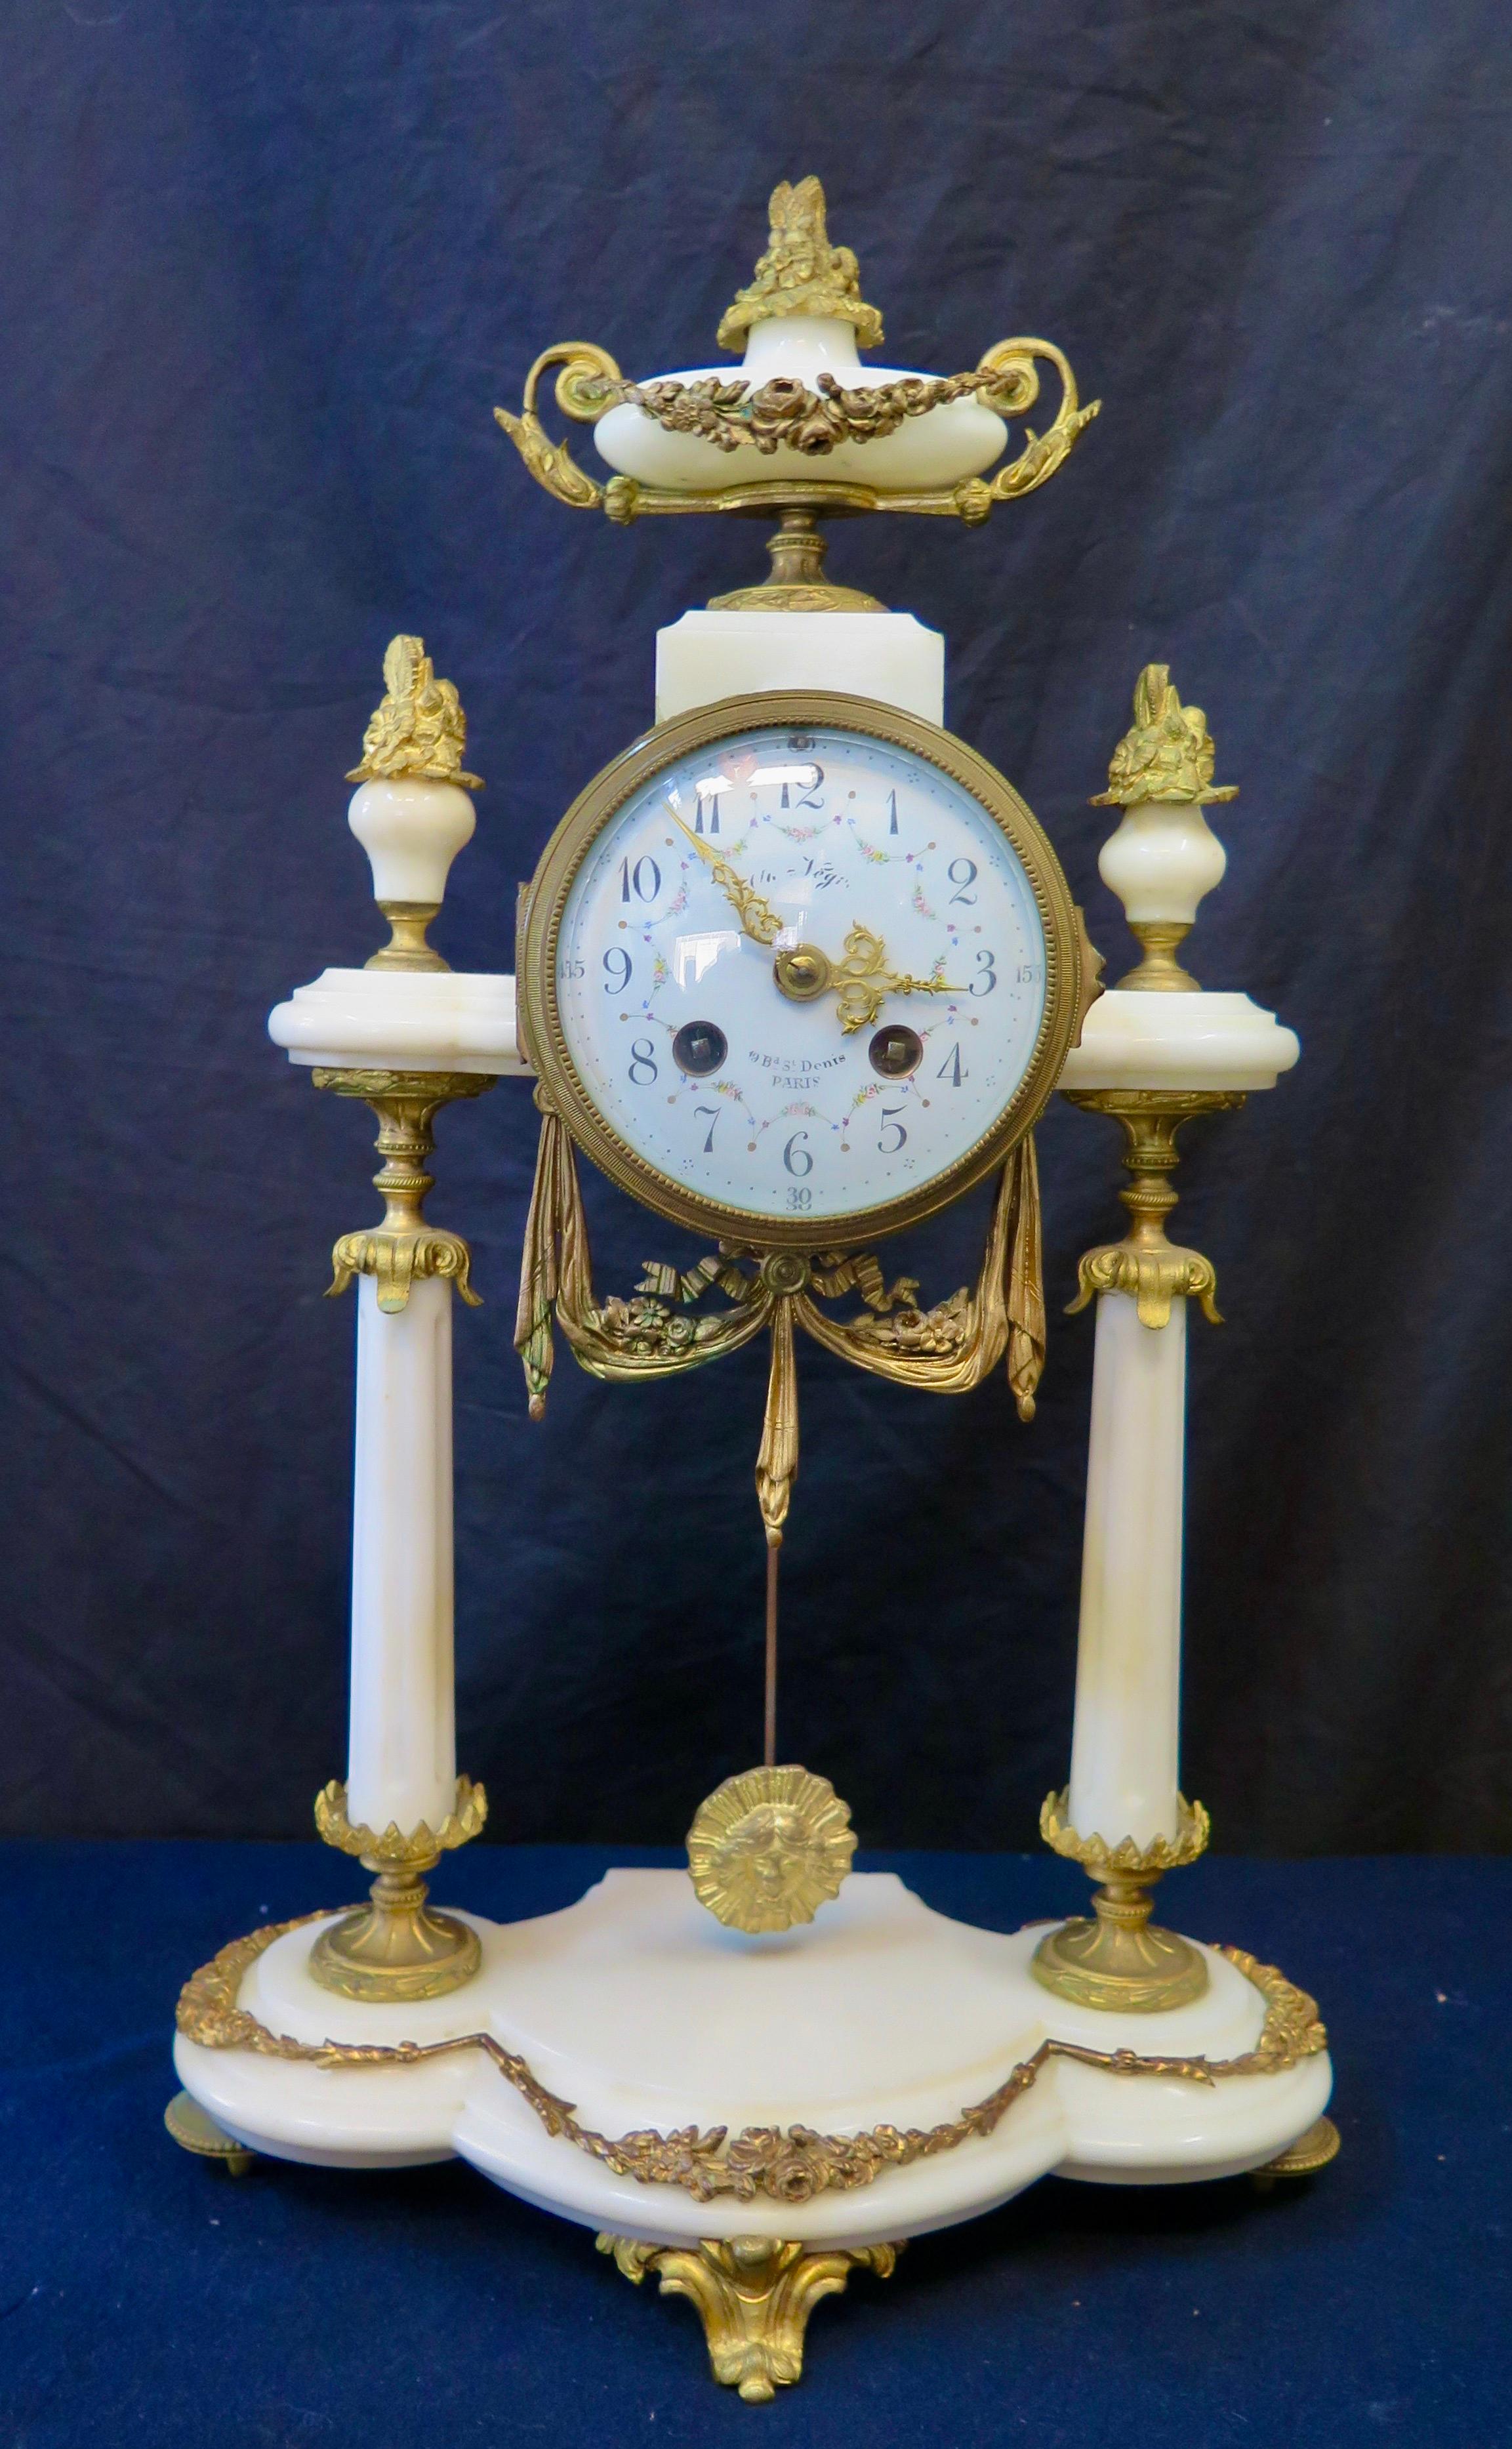 This vintage 19th century marble & dore' bronze clock set is beautifully designed in a Louis XVI motif. The clock features a decorative hand painted round enamel face with Arabic numerals, enclosed behind a hinged glass door. Clock works are within